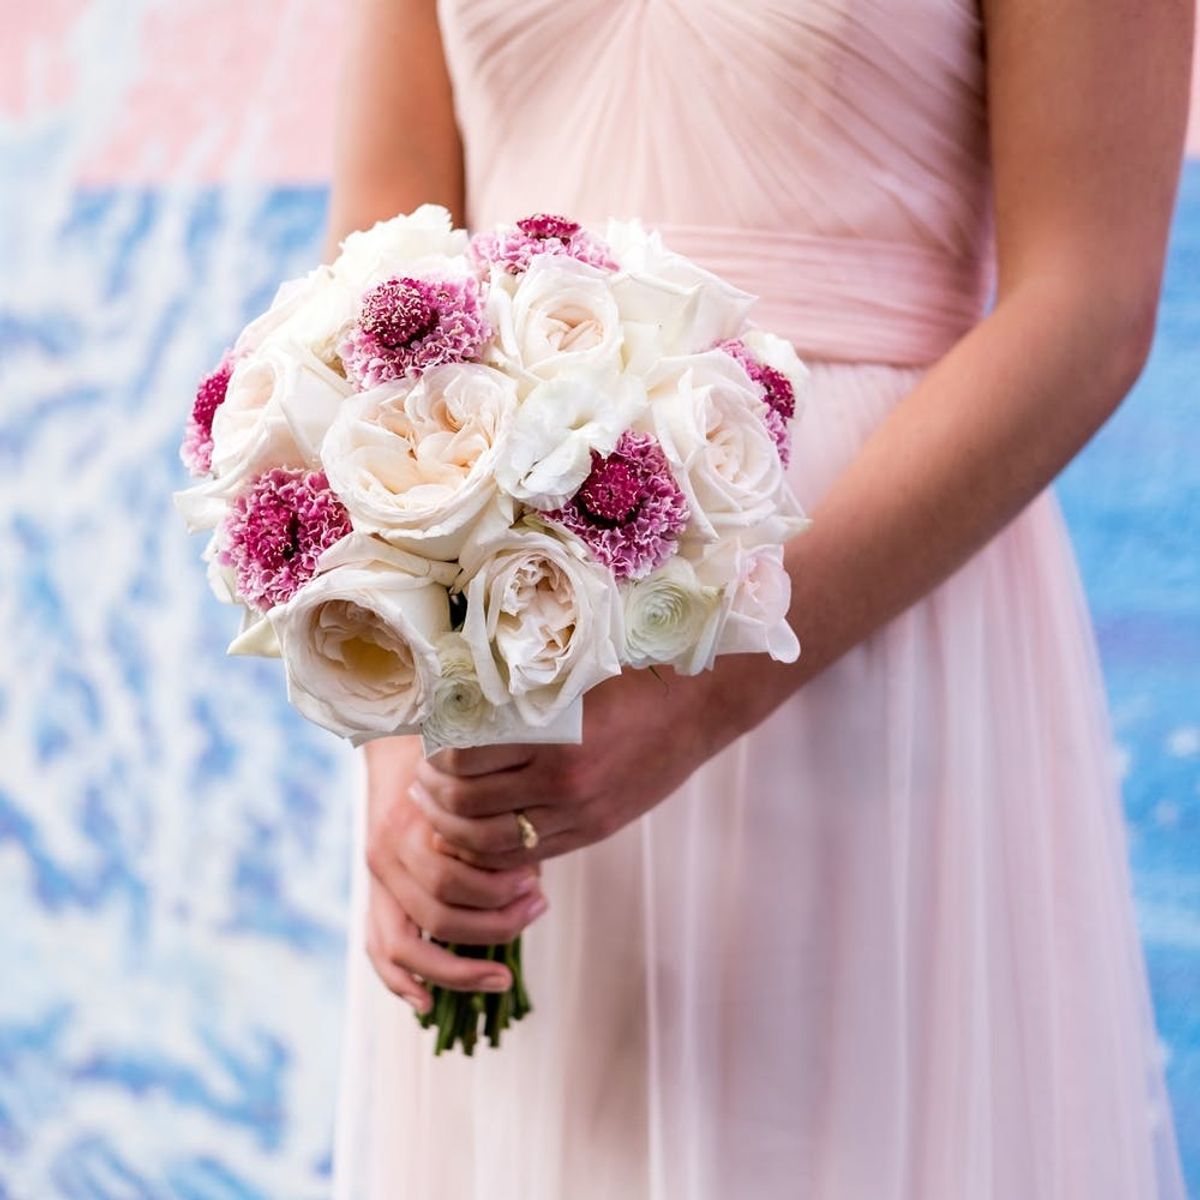 Wedding Florals for Every Type of Bride, Plus Expert Advice from a Pro